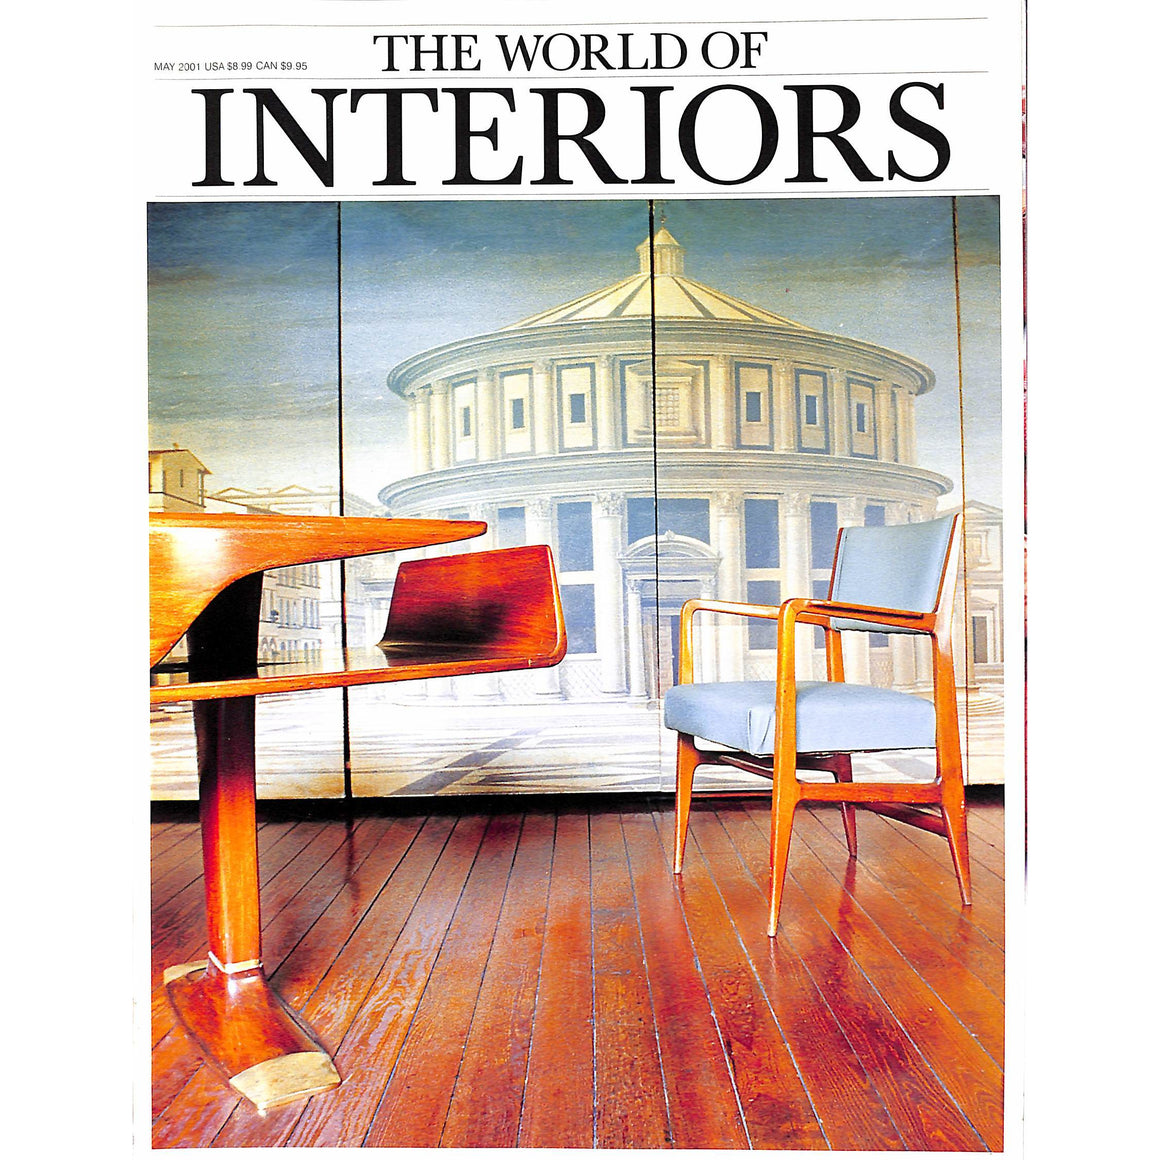 The World Of Interiors May 2001 (SOLD)